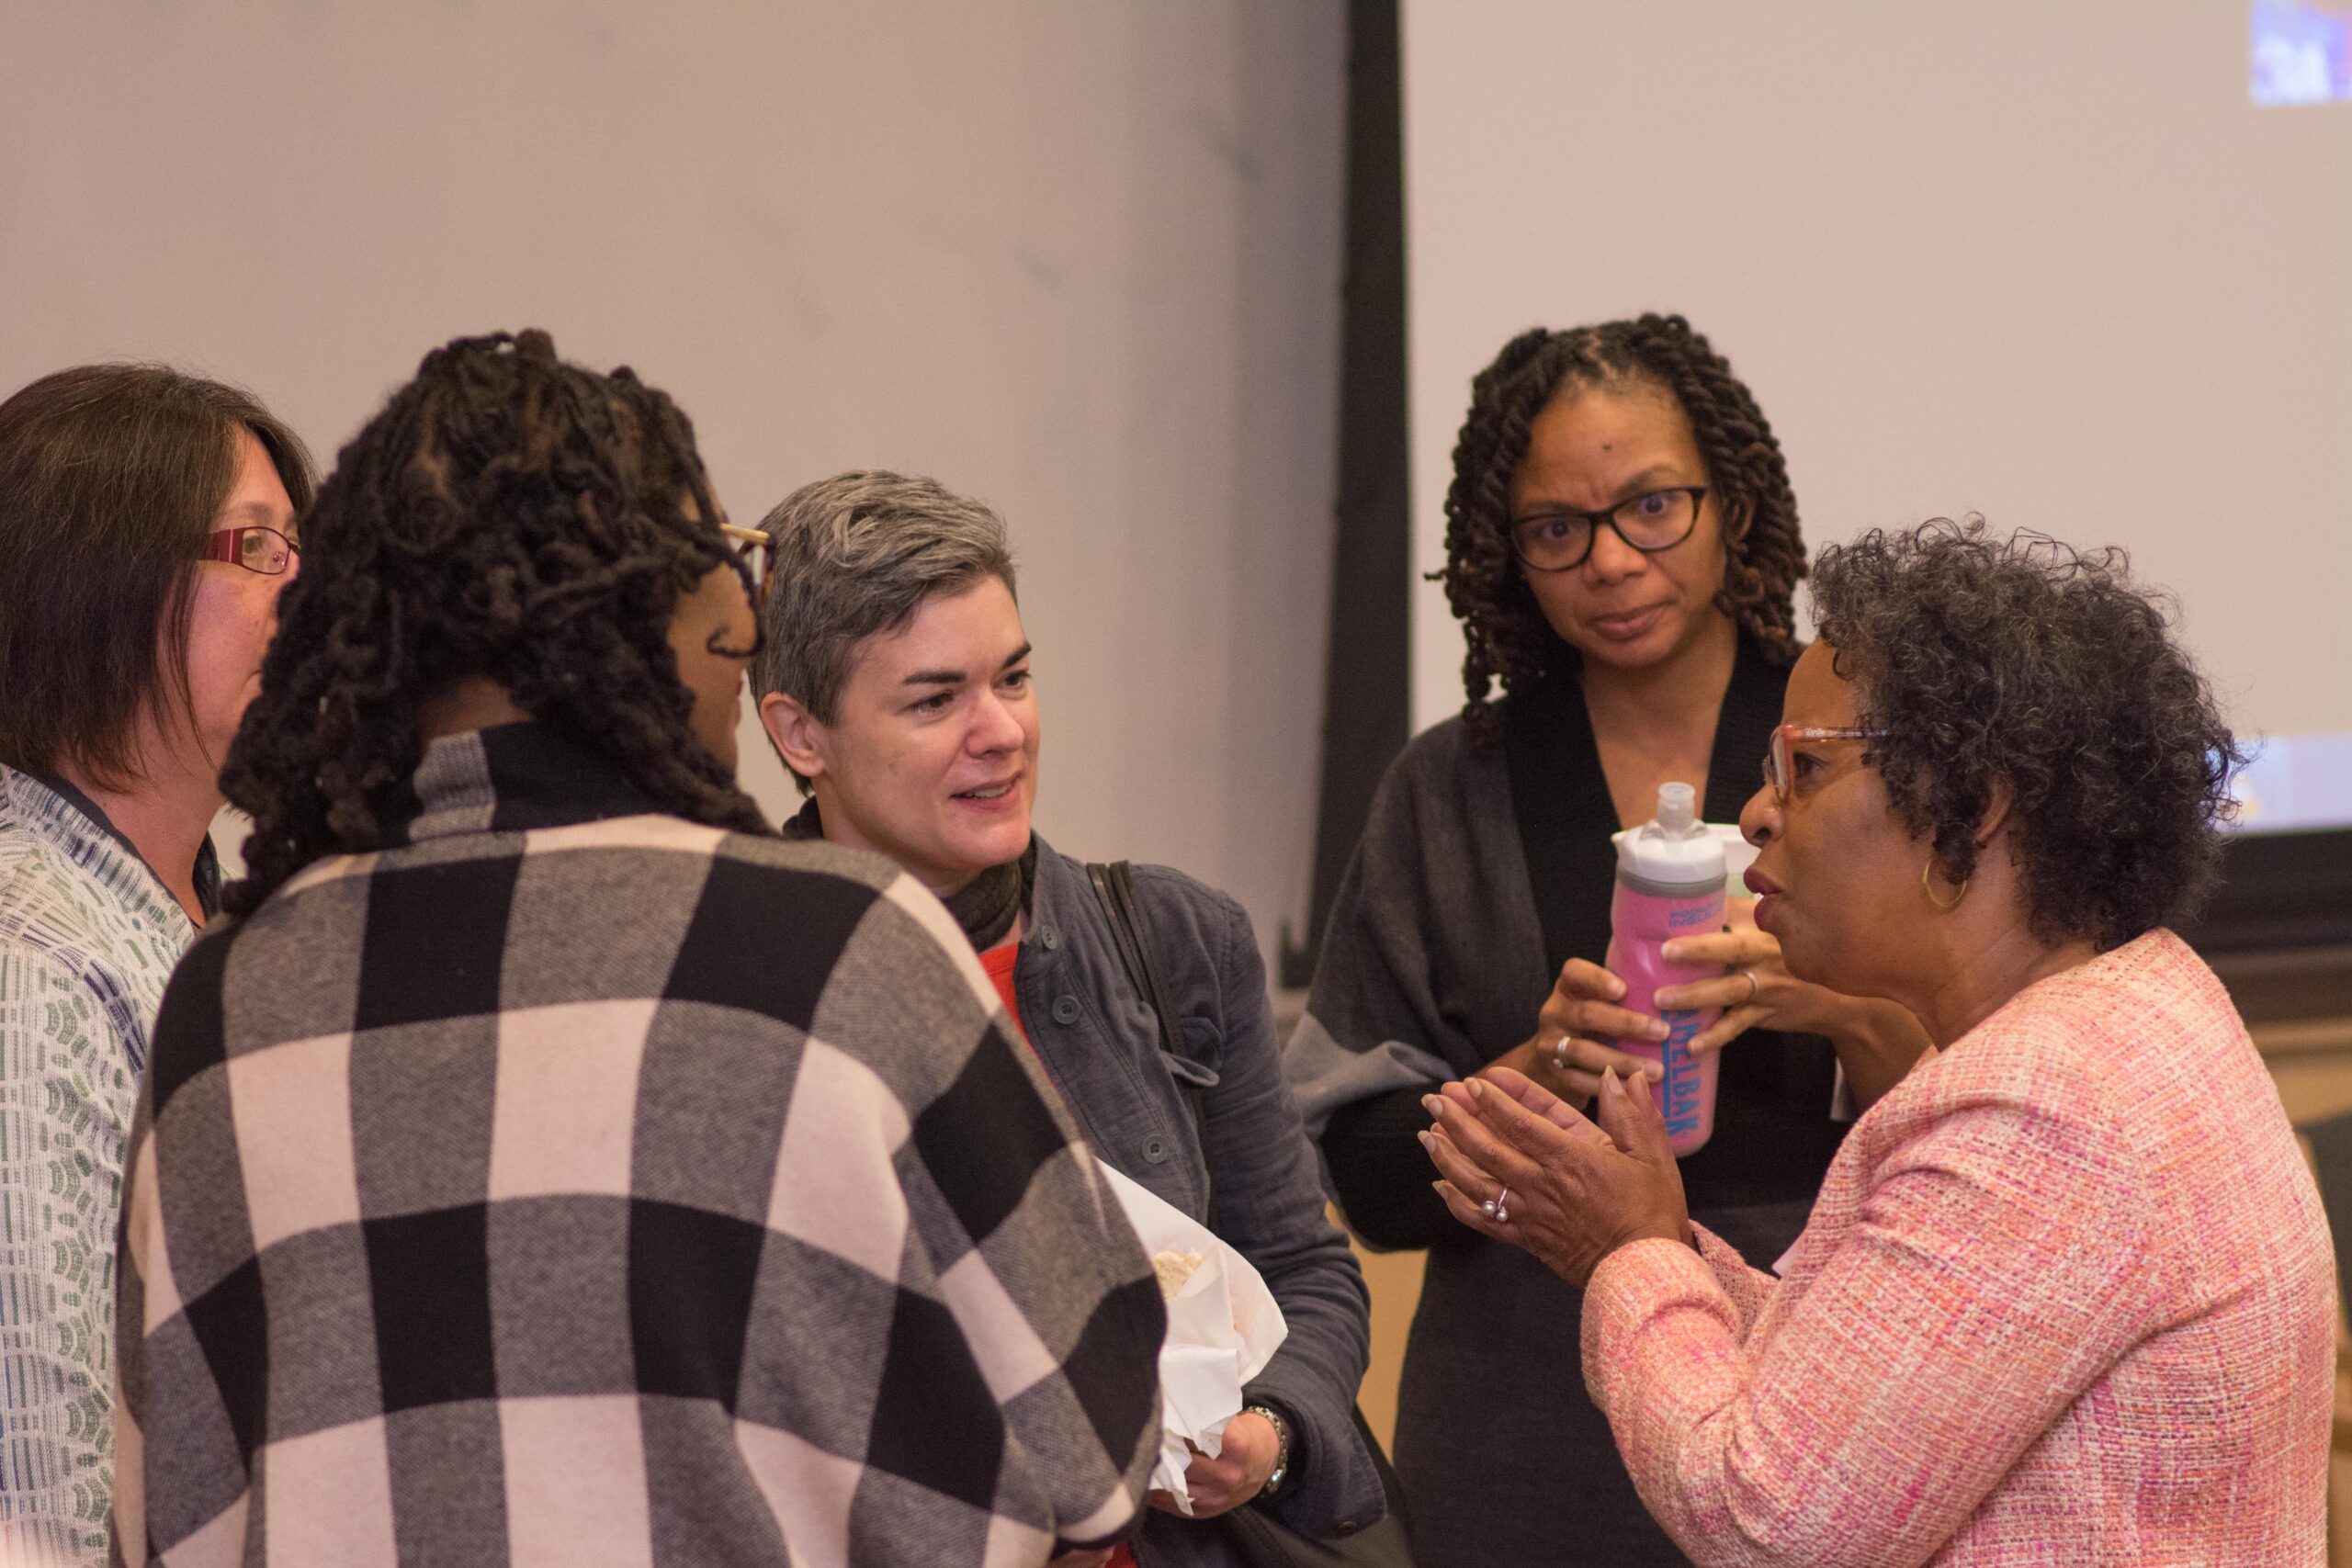 Baltimore Stories concluding event, December 3, 2016. Photo by Abnet Shiferaw '11 for UMBC.